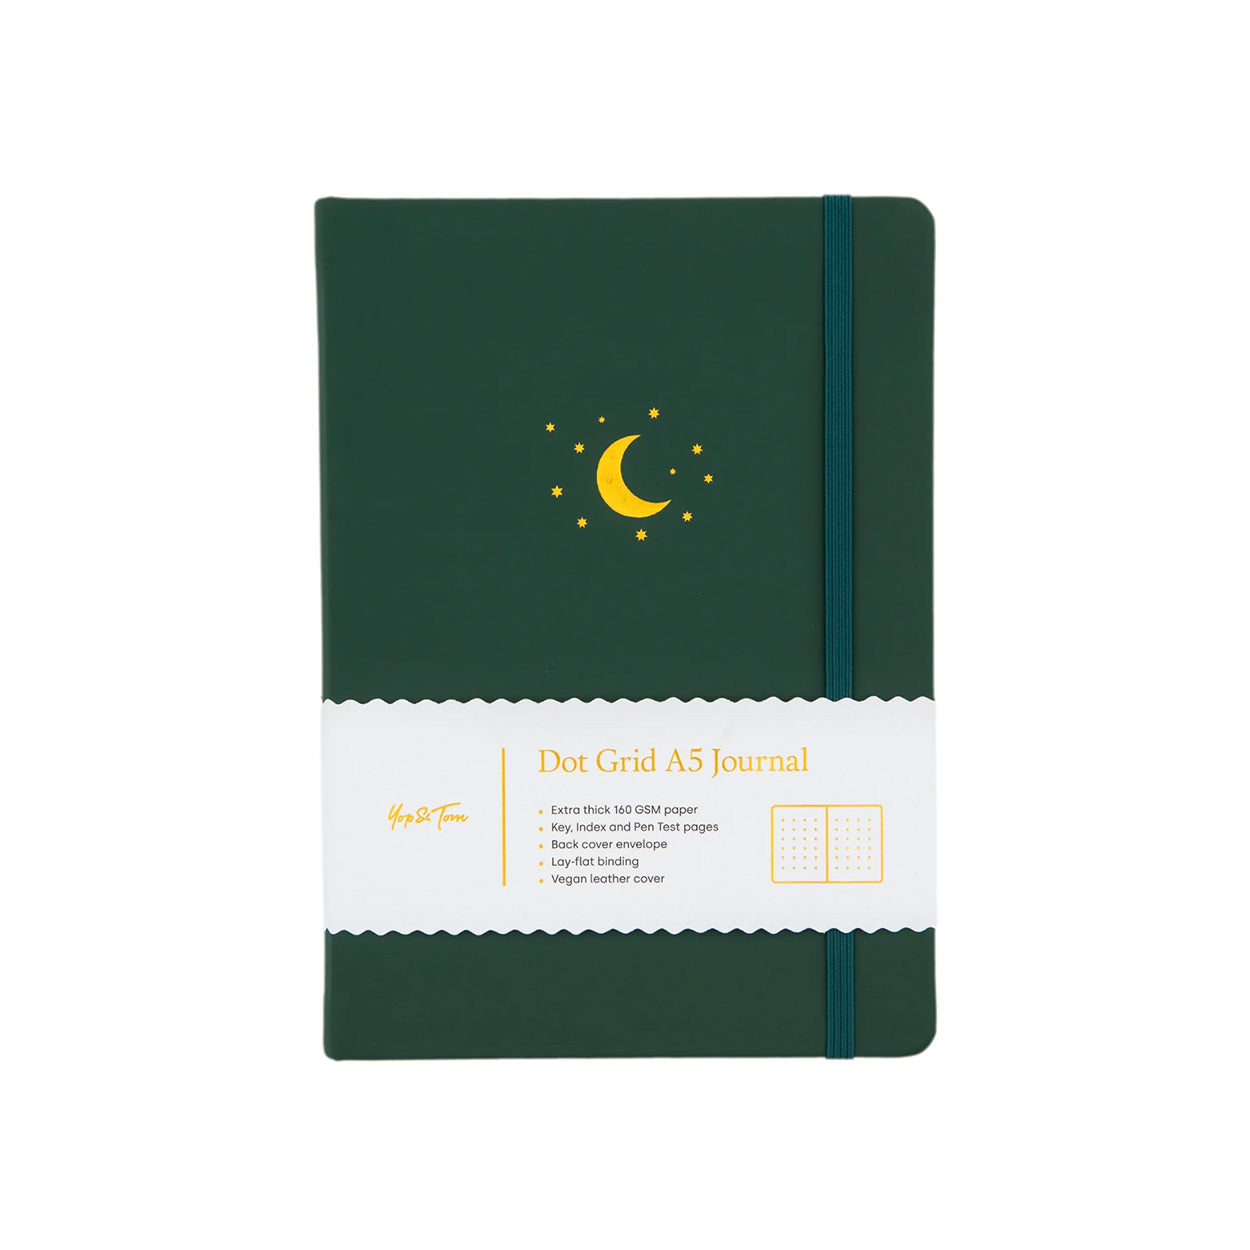 Yop & Tom - A5 Dot Grid Journal - Moon and Stars - Forrest Green-Notitieboek-DutchMills